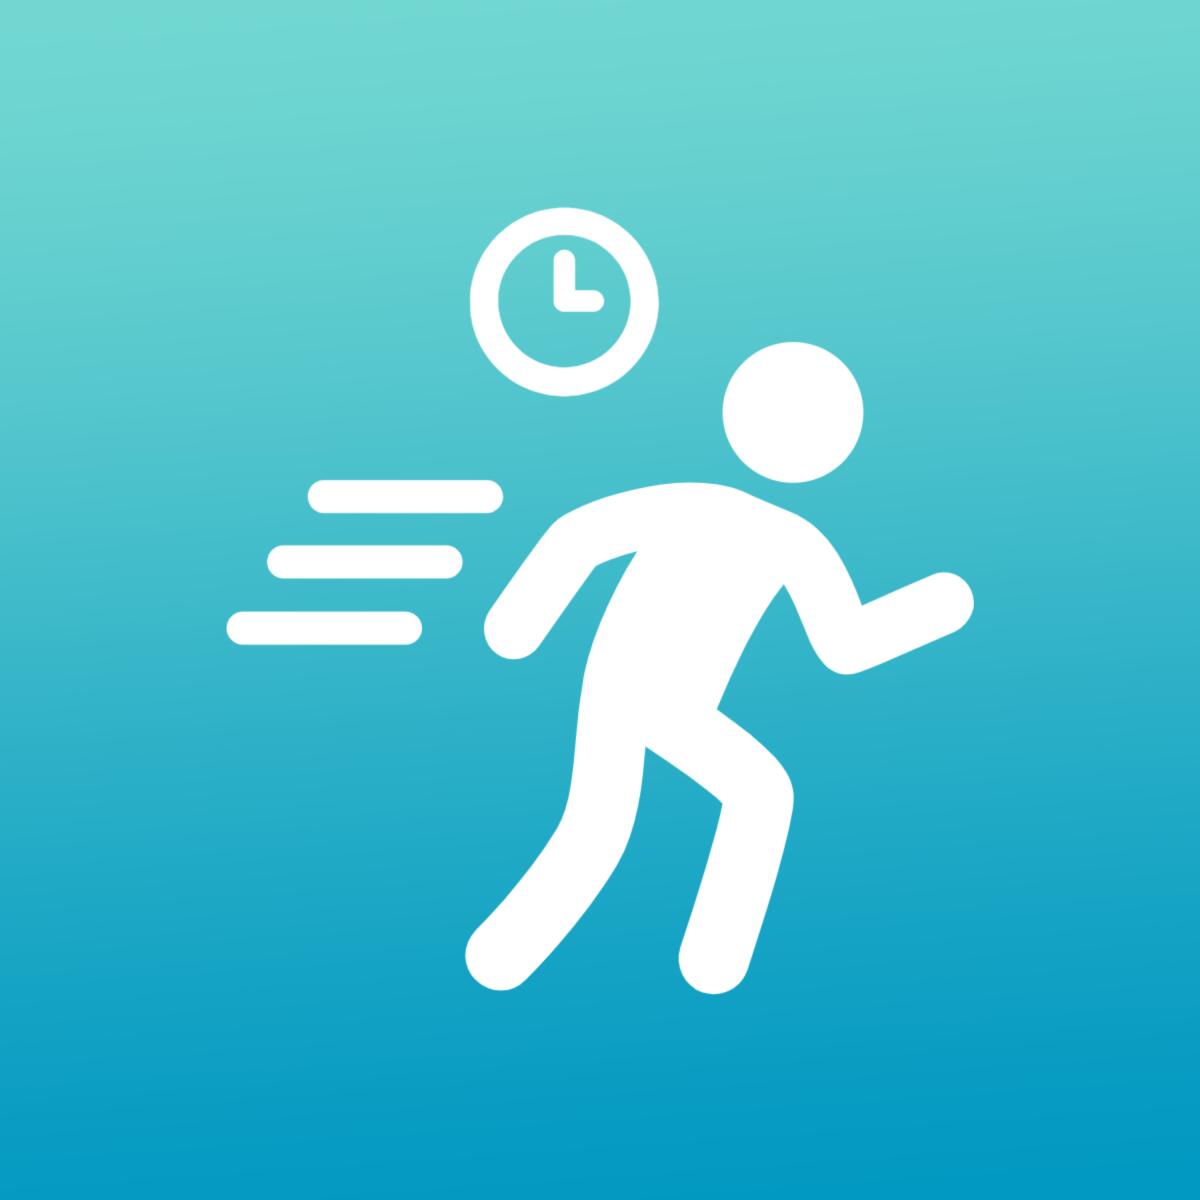 Pictogram of person running